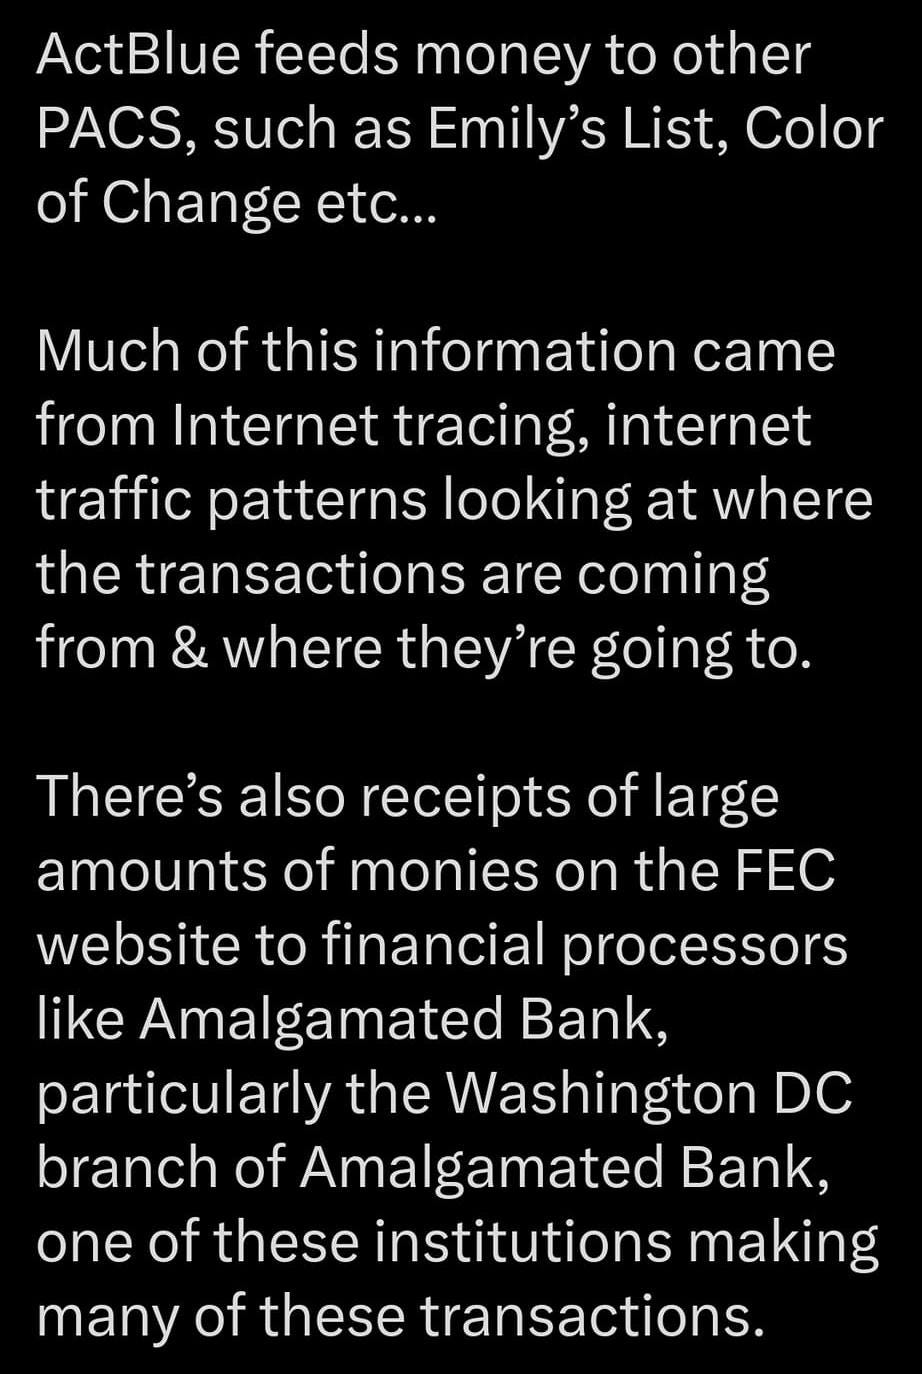 May be an image of text that says '10:33 5G. 39% Post from CHINA! ActBlue feeds money to other PACS, such as Emily' s List, Color of Change etc... Much of this information came from Internet tracing, internet traffic patterns looking at where the transactions are coming from & where they're going to. There's also receipts of large amounts of monies on the FEC website to financial processors like Amalgamated Bank, particularly the Washington DC branch of Amalgamated Bank, one of these institutions making many of these transactions. Post your ep'